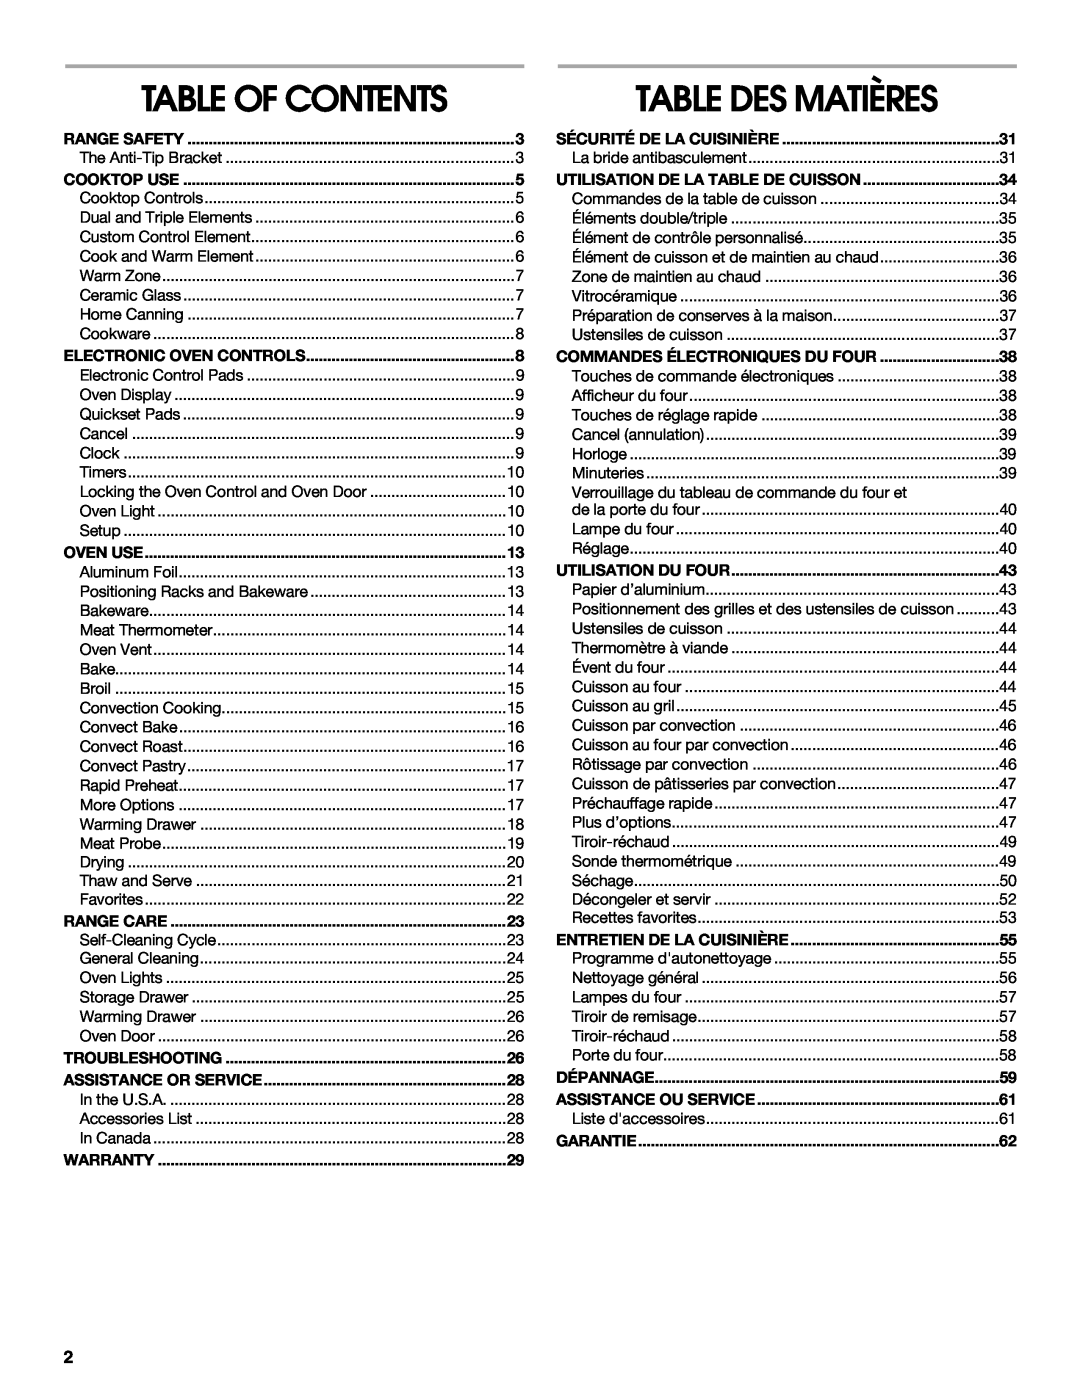 Jenn-Air JES8850 Table Of Contents, Range Safety, Cooktop Use, Electronic Oven Controls, Oven Use, Range Care, Warranty 